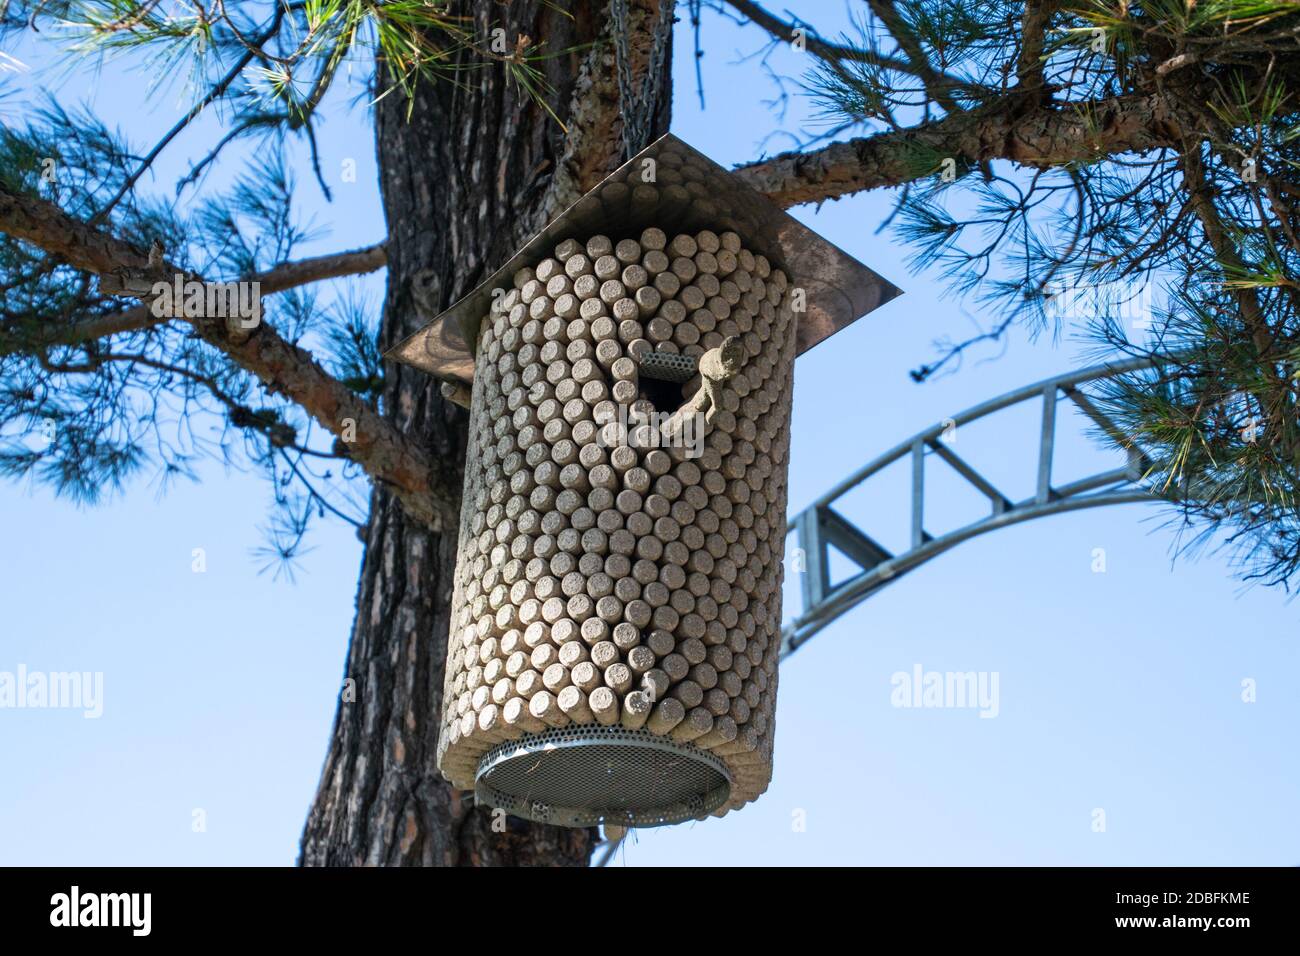 Birdhouse made from corks from wine bottles. Birdhouse on a pine tree. Stock Photo